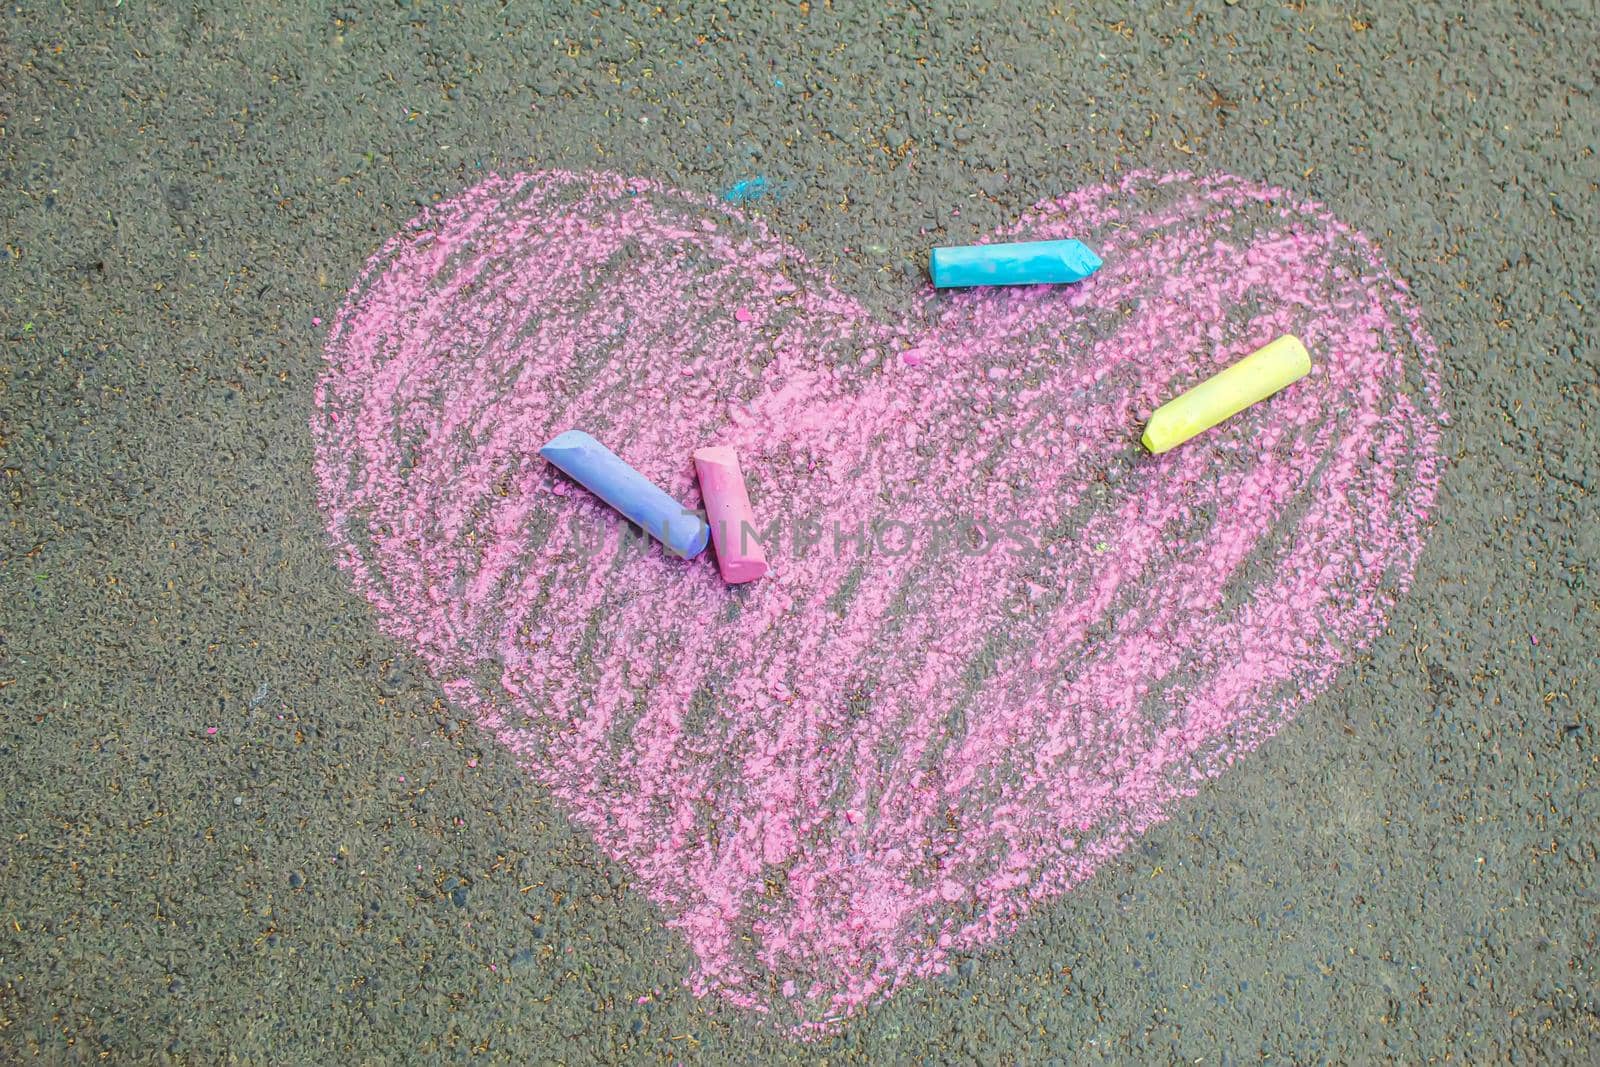 child painted a heart on the asphalt with chalk. selective focus.art